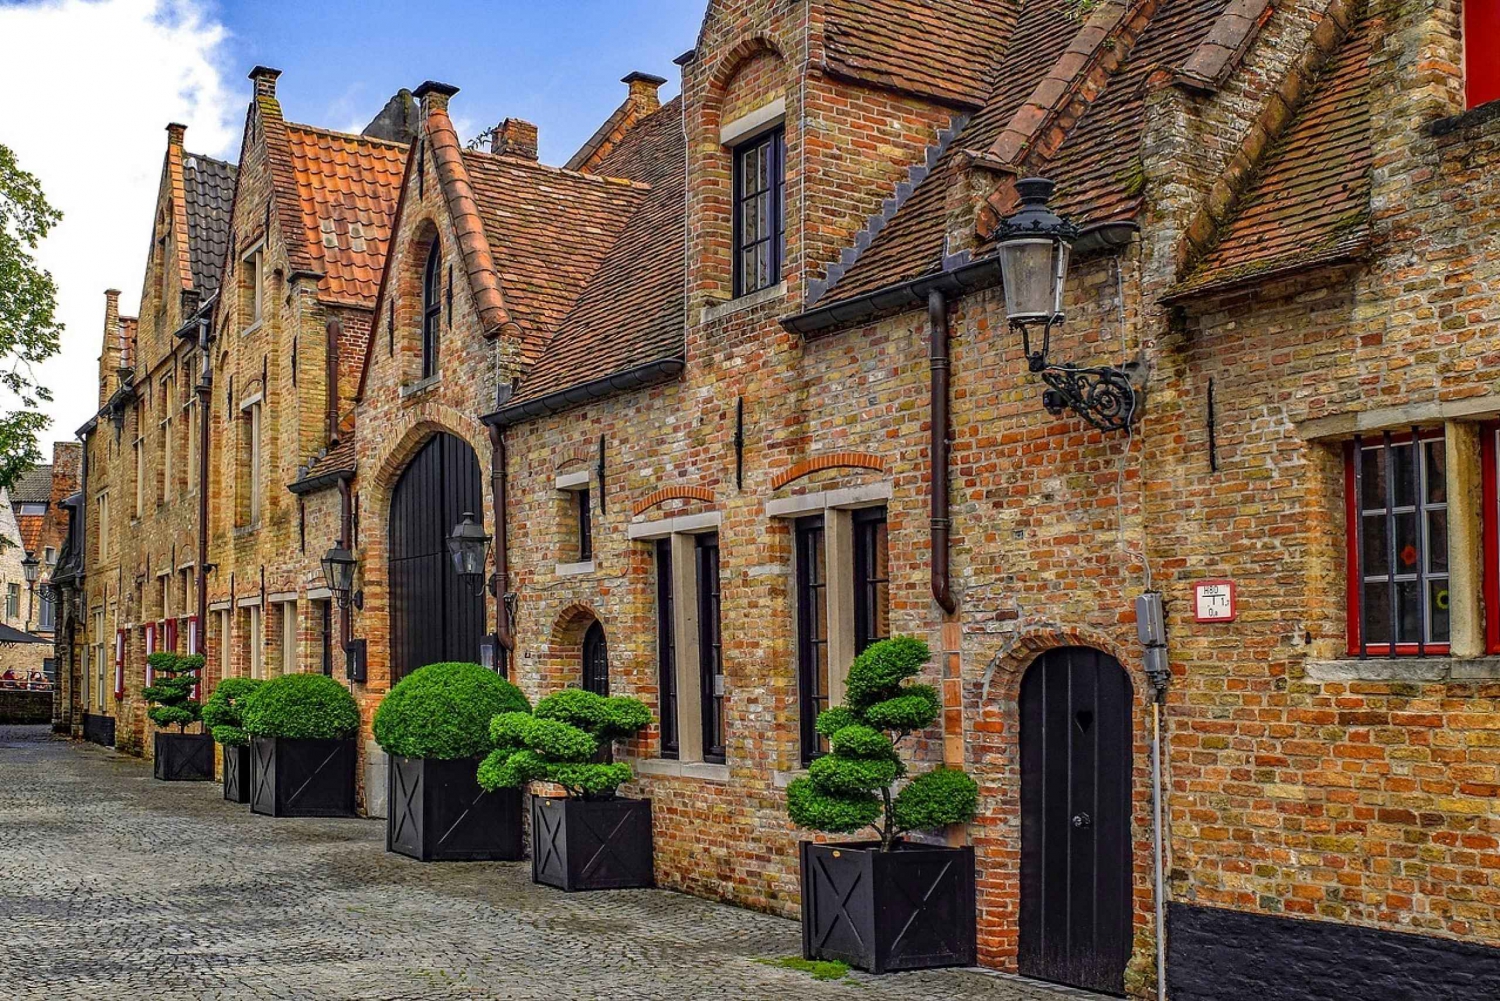 Amsterdam to Bruges Private Transfer